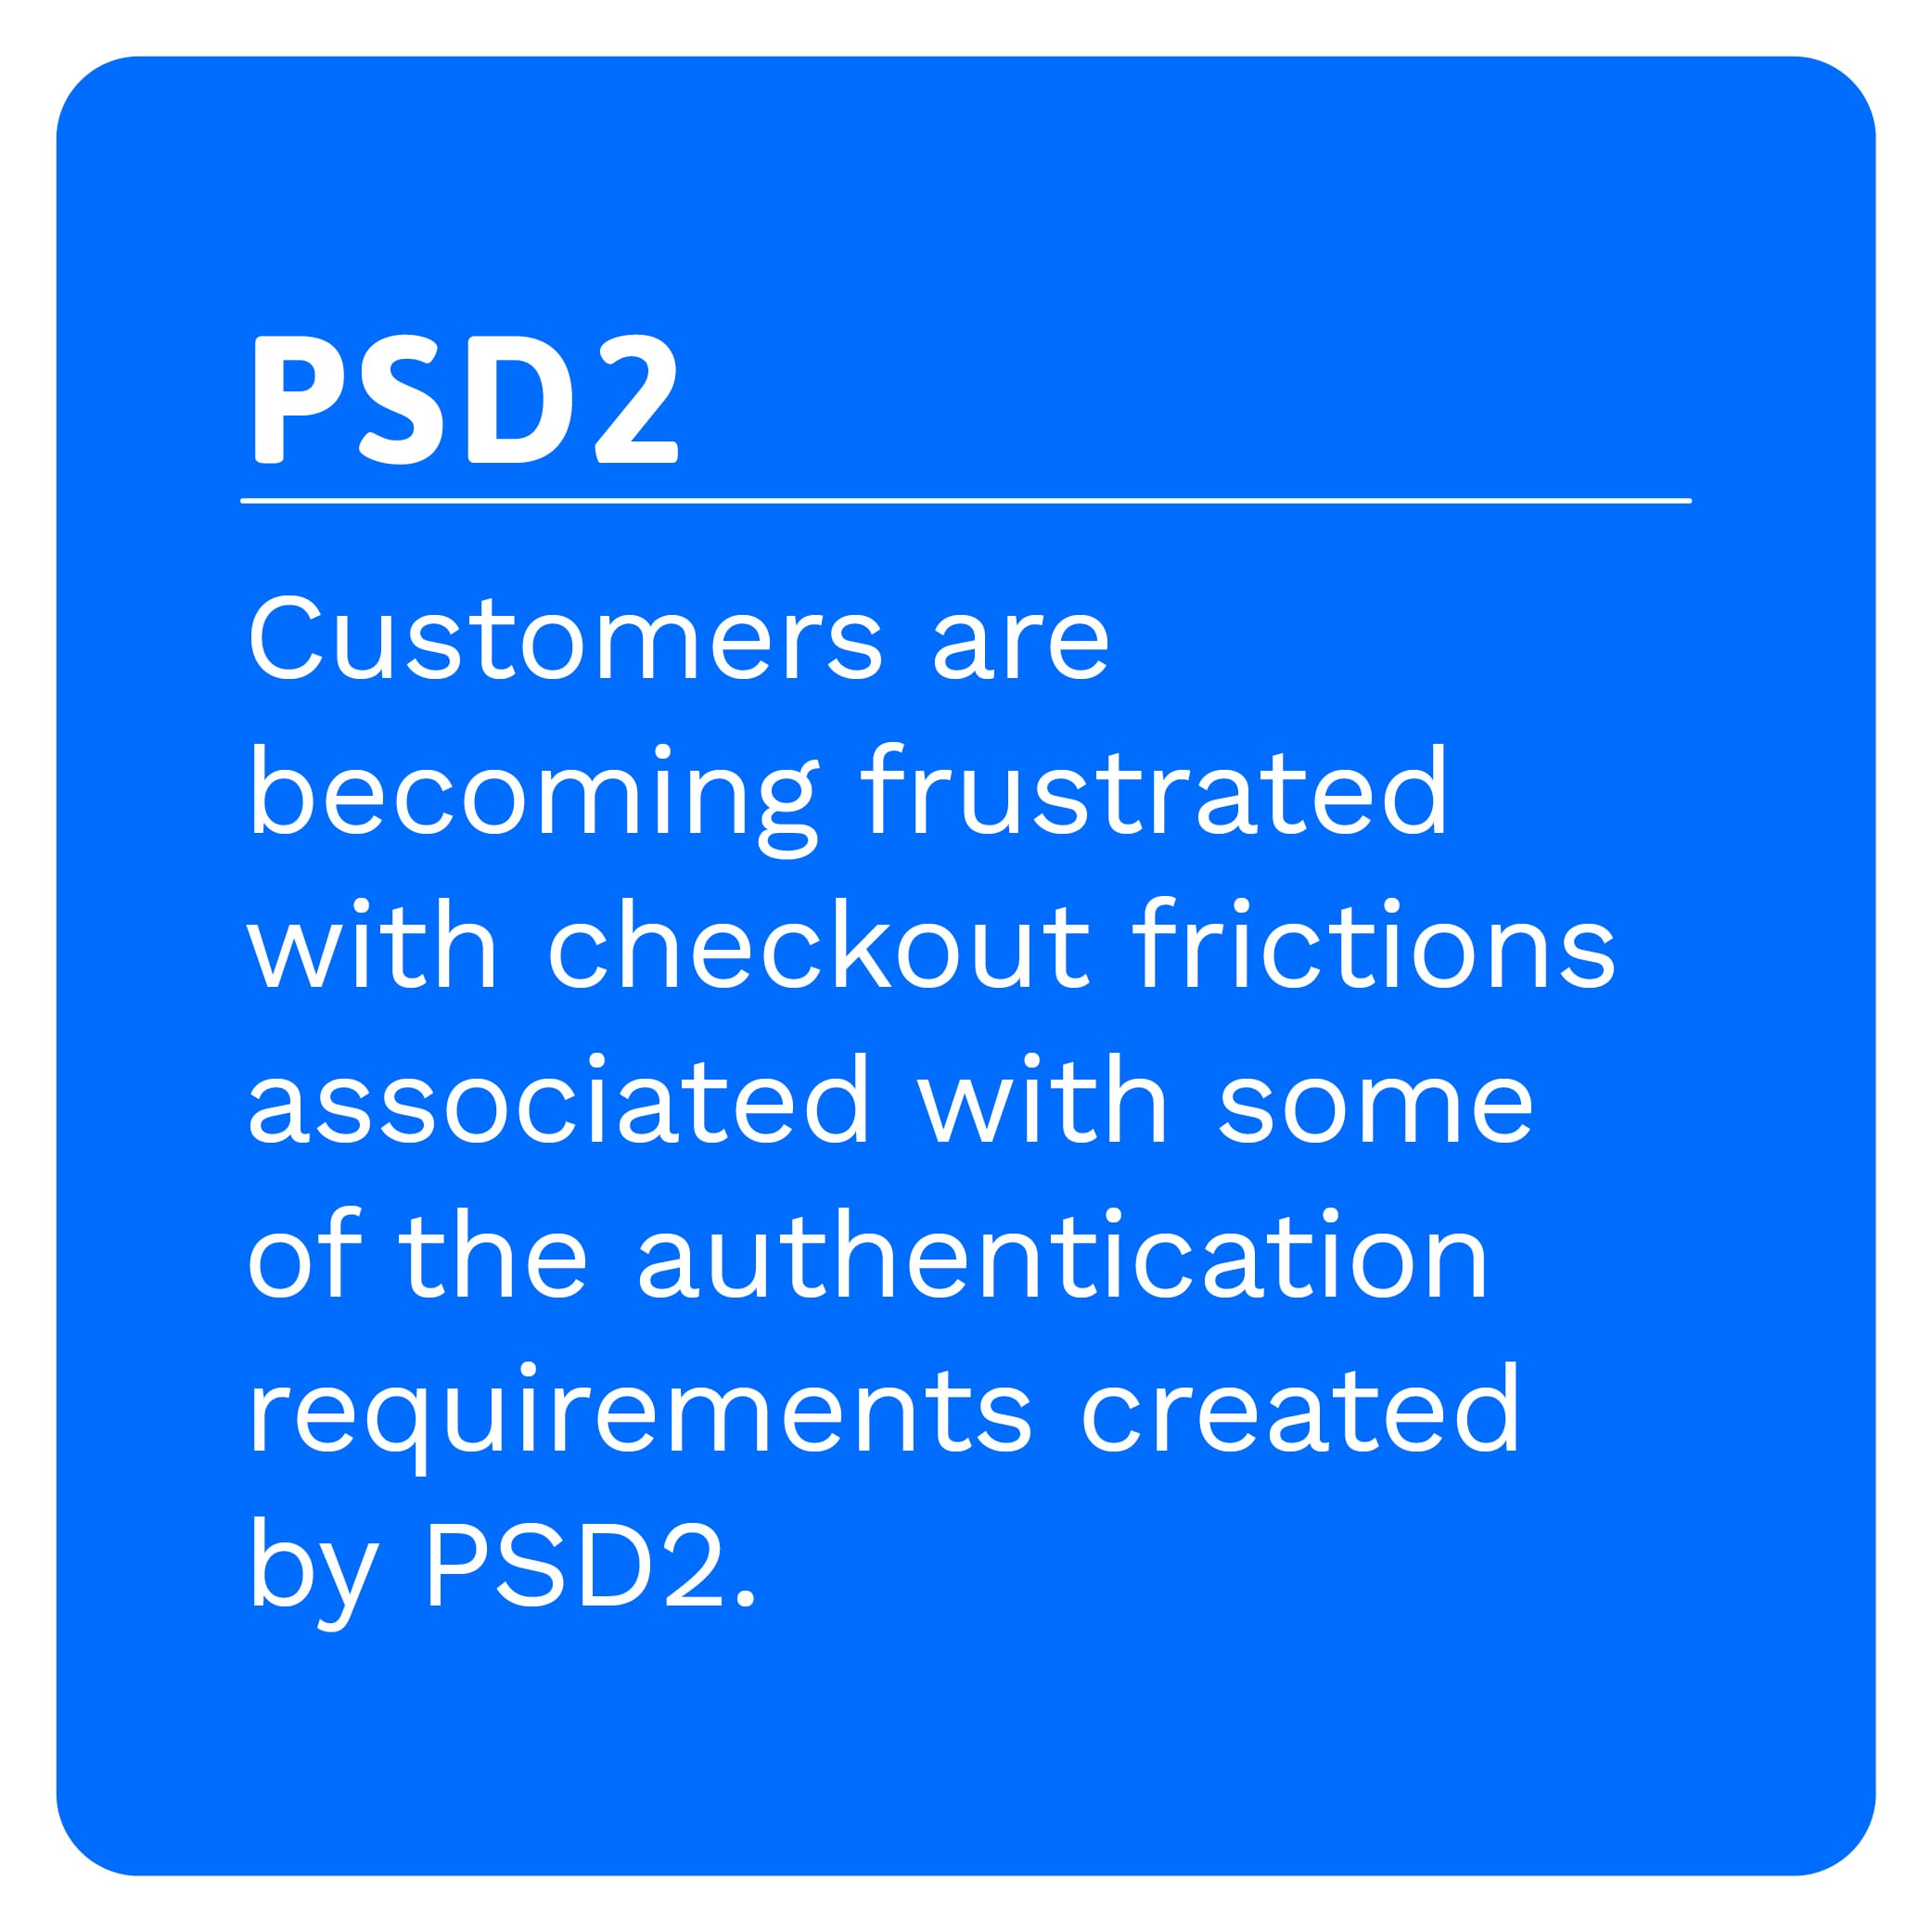 PSD2: Customers are becoming frustrated with checkout frictions associated with some of the authentication requirements created by PSD2.